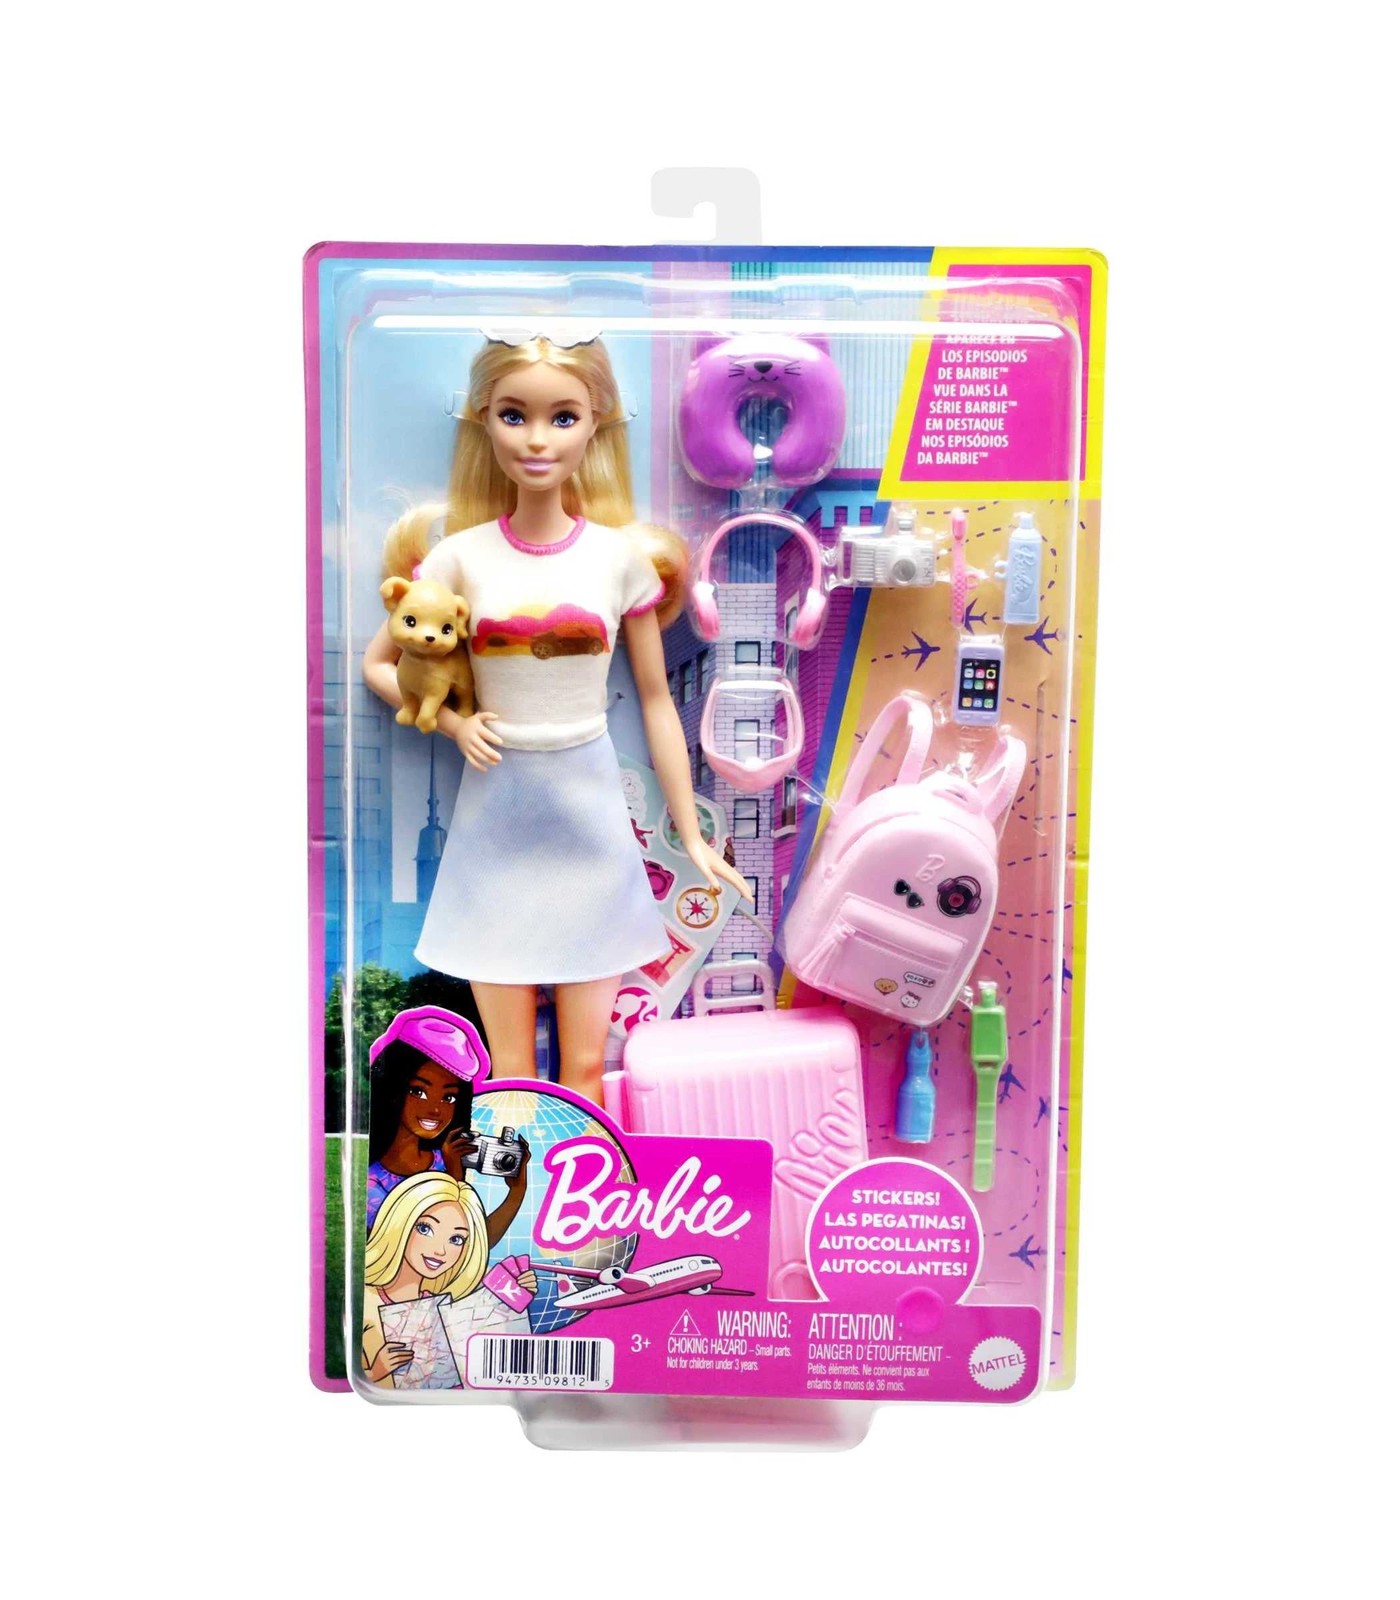 Barbie Doll and Travel Set